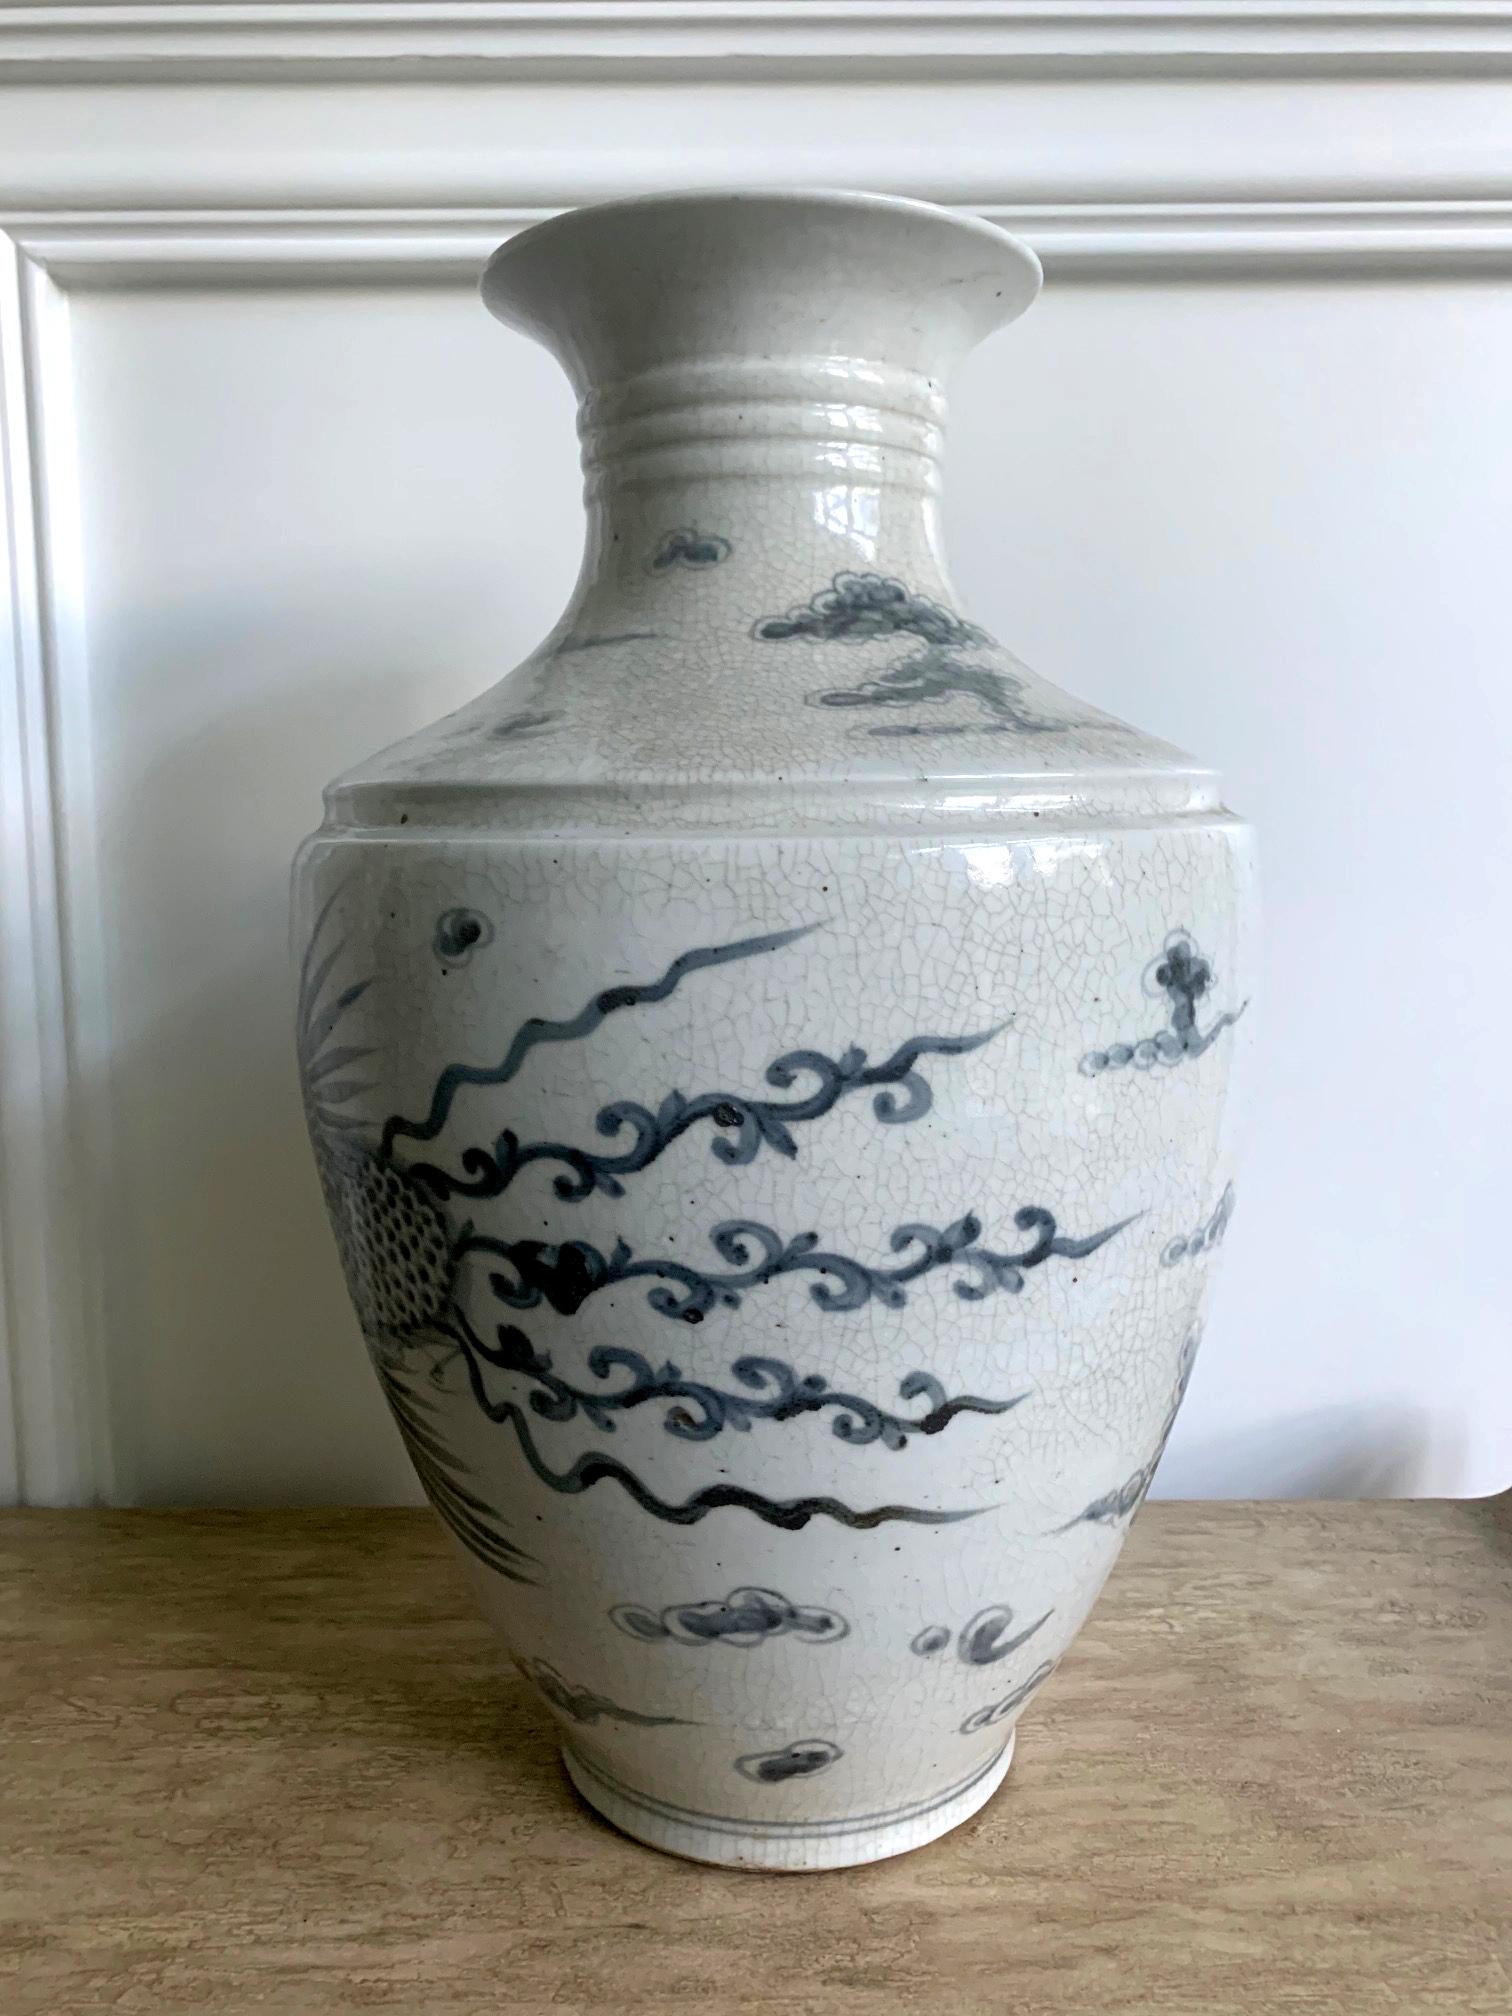 A large and heavy Korean ceramic vase in a Classic Chinese form with open mouth with a wide flared rim, a neck with three concentric grooves and a sloped broad shoulder. The blue and white design features two underglazed phoenixes in tandem